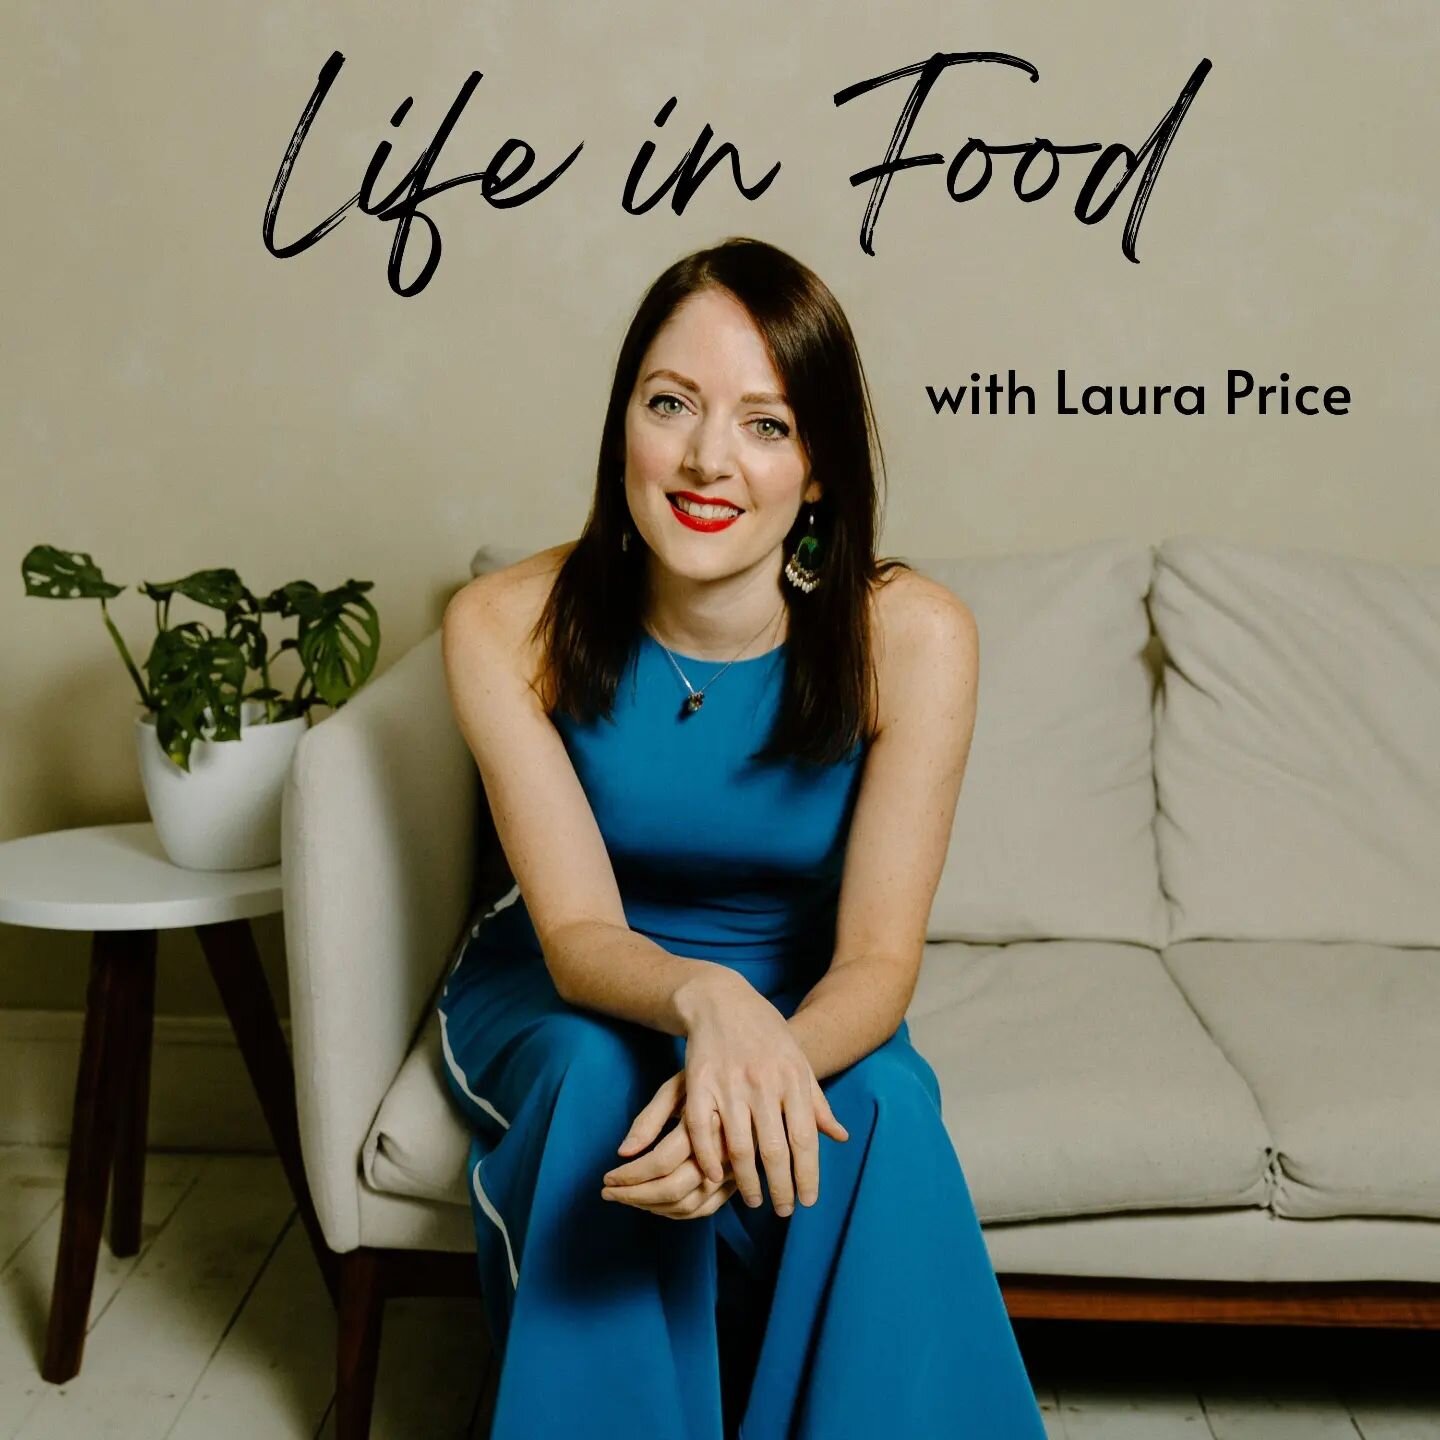 I've been shortlisted for the Best Broadcast Journalist category in the inaugural Freelance Journalism Awards for my podcast Life in Food. I'm absolutely thrilled! 

I launched Life in Food a year ago as a platform to have long-form conversations wit